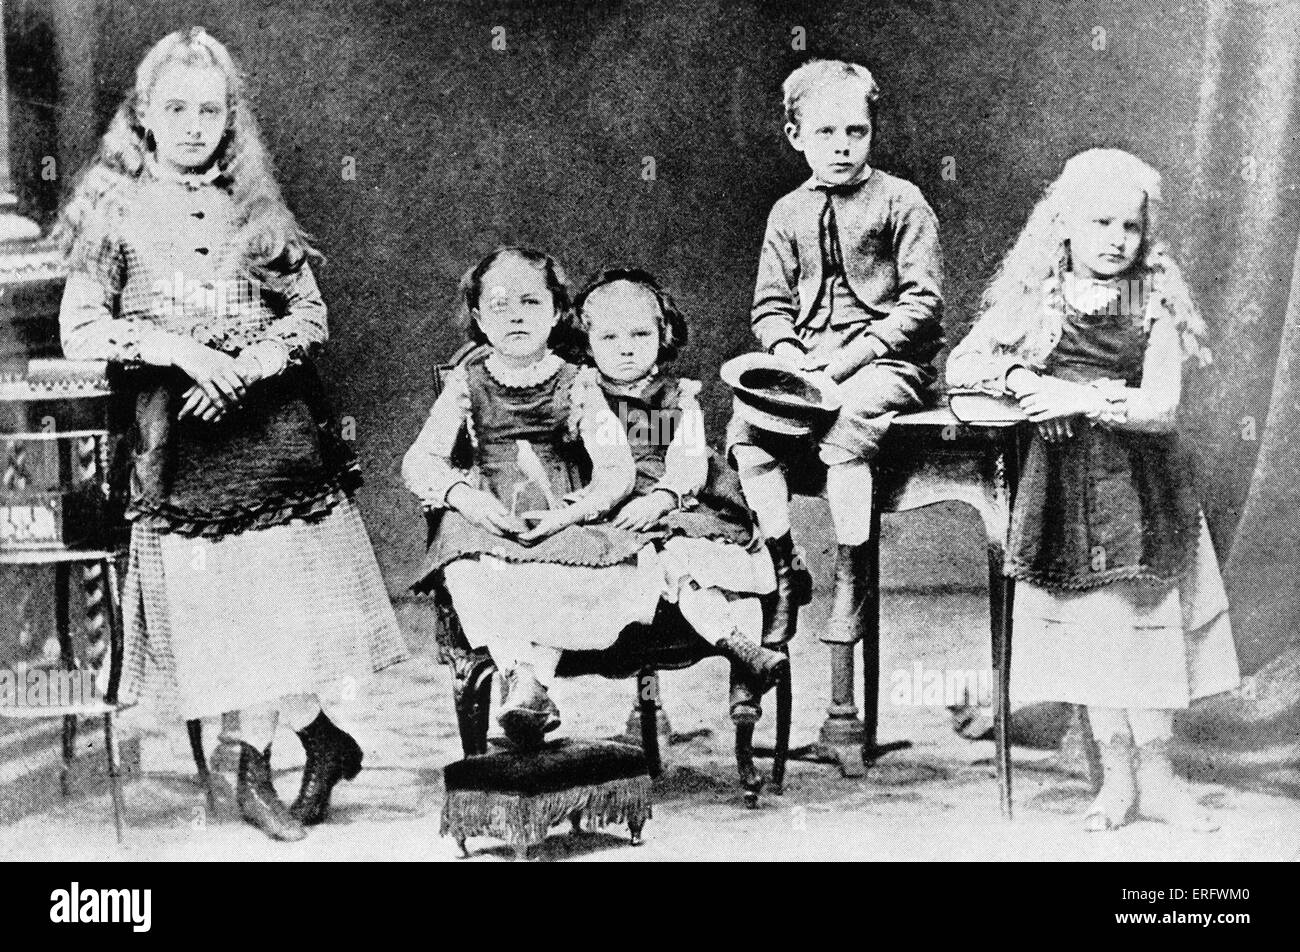 Marie Curie as a child with her brother and sisters. From left to right are Zosia, Hela, Manya (Marie Curie), Joseph and Bronya. MC: Polish-born French physicist and pioneer in radioactivity, 7 November 1867 – 4 July, 1934 Stock Photo